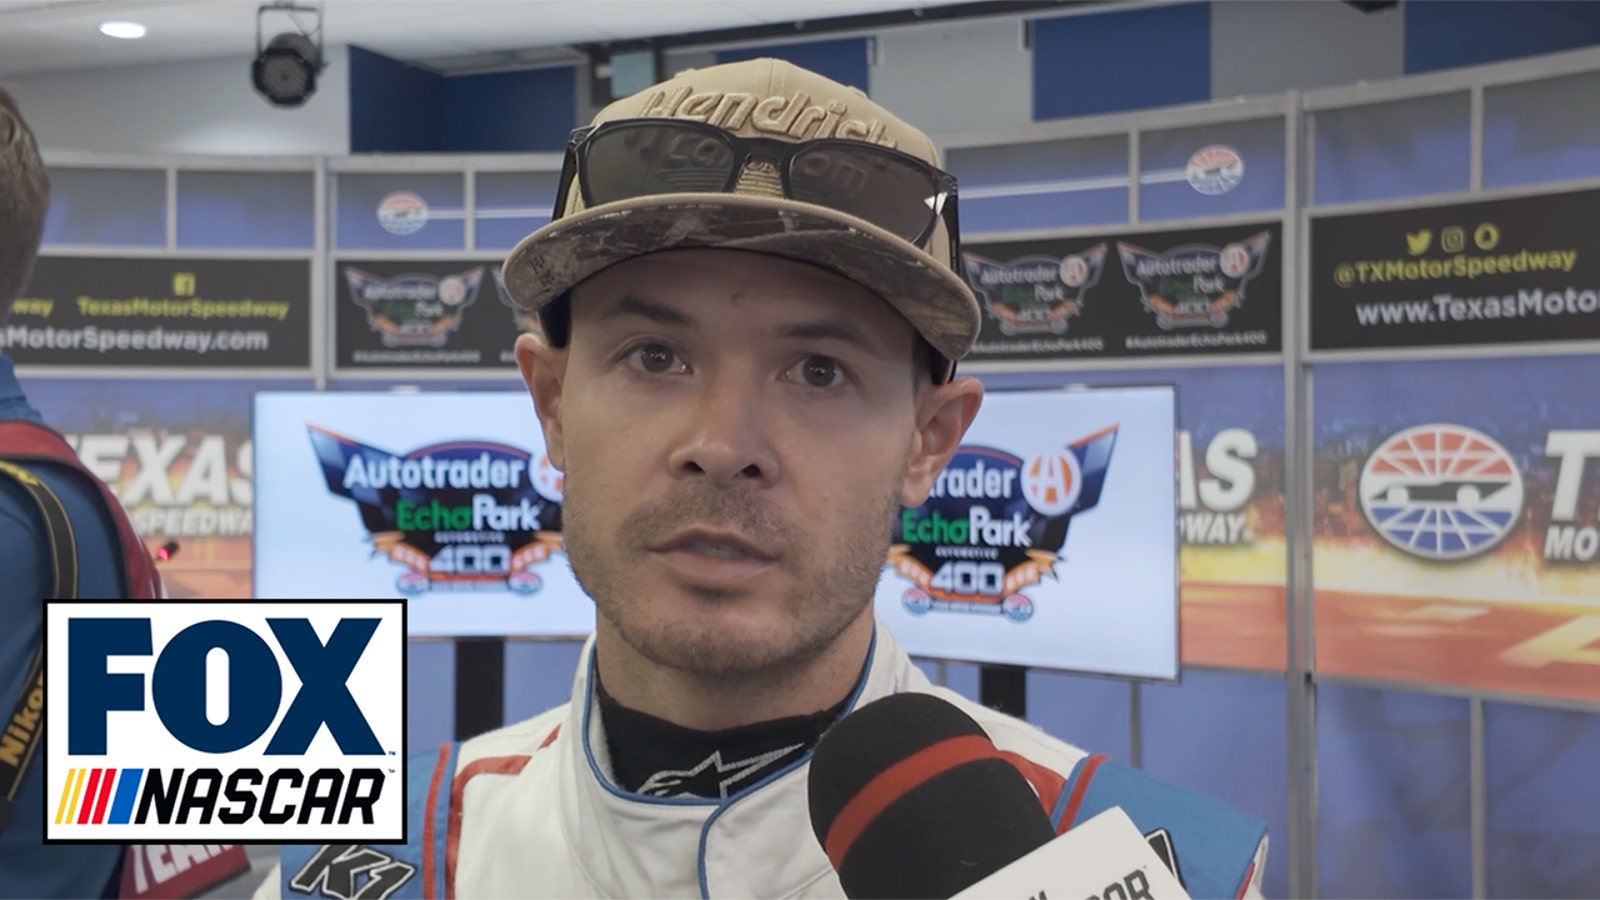 Kyle Larson on what he learned at the Indy 500 open test and whether he now feels ready for the race